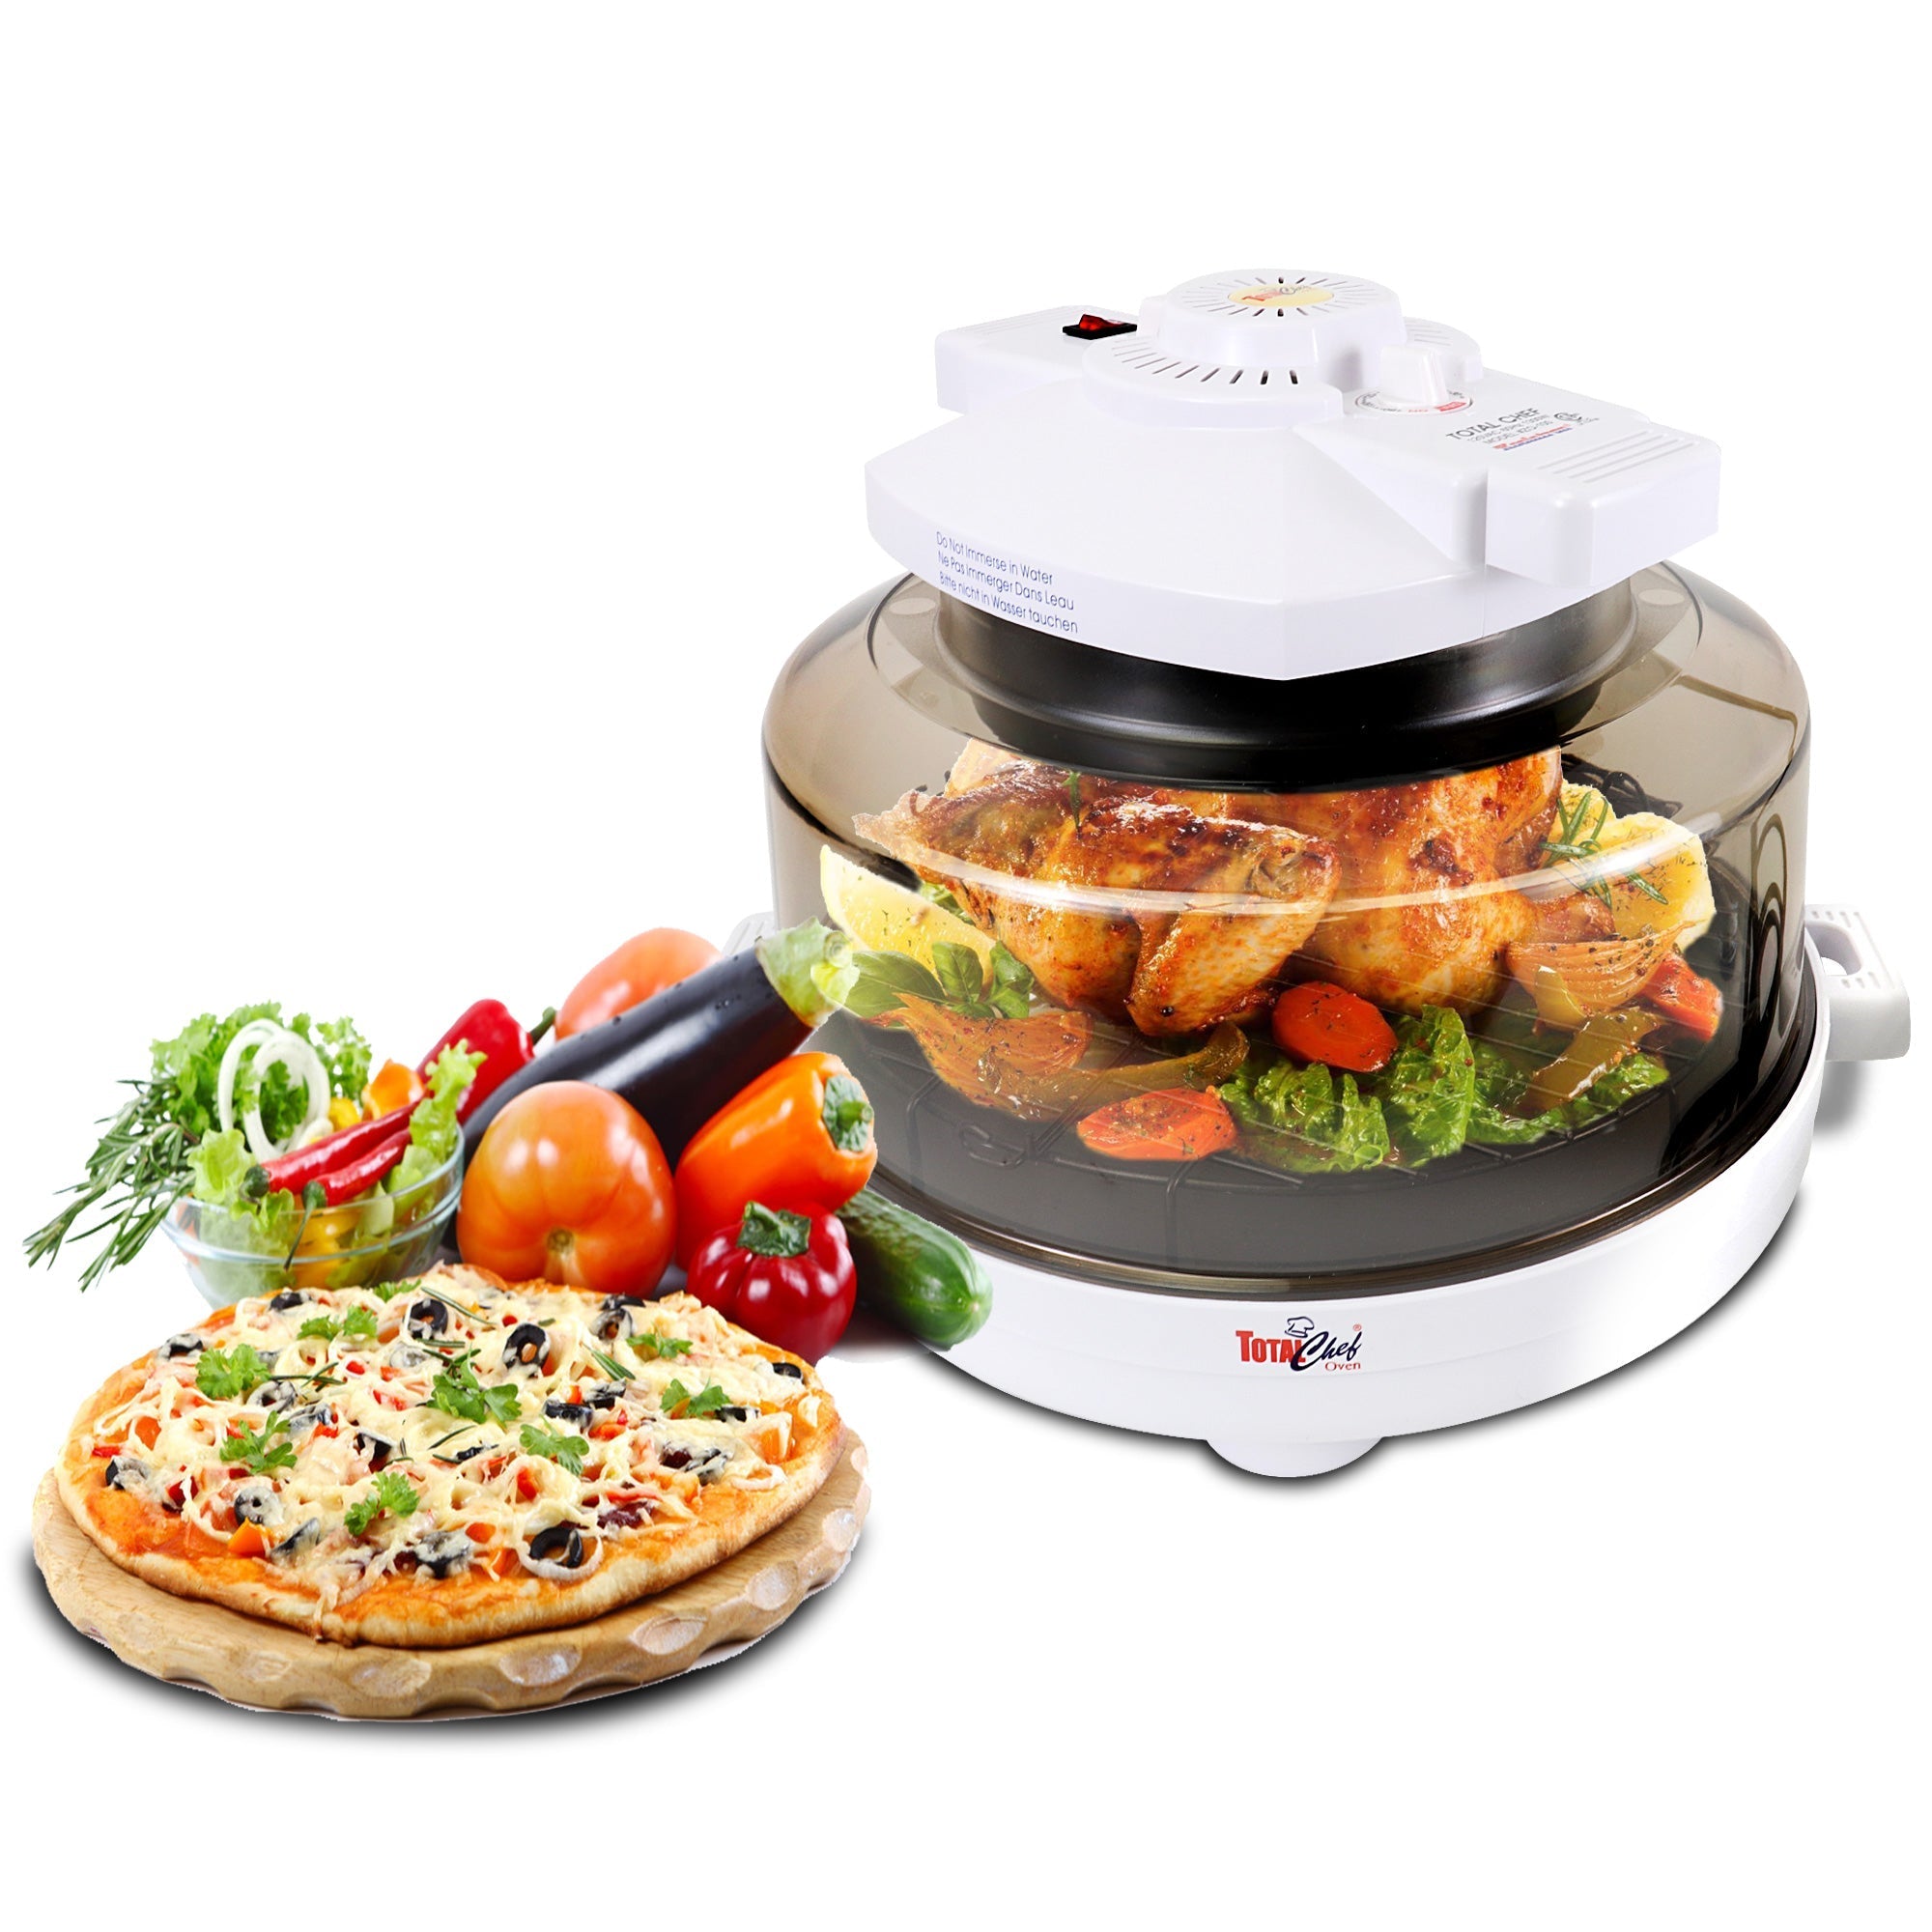 Product shot of Total Chef infrared oven with a roast chicken dinner inside and a pizza and several raw vegetables beside it on a white background